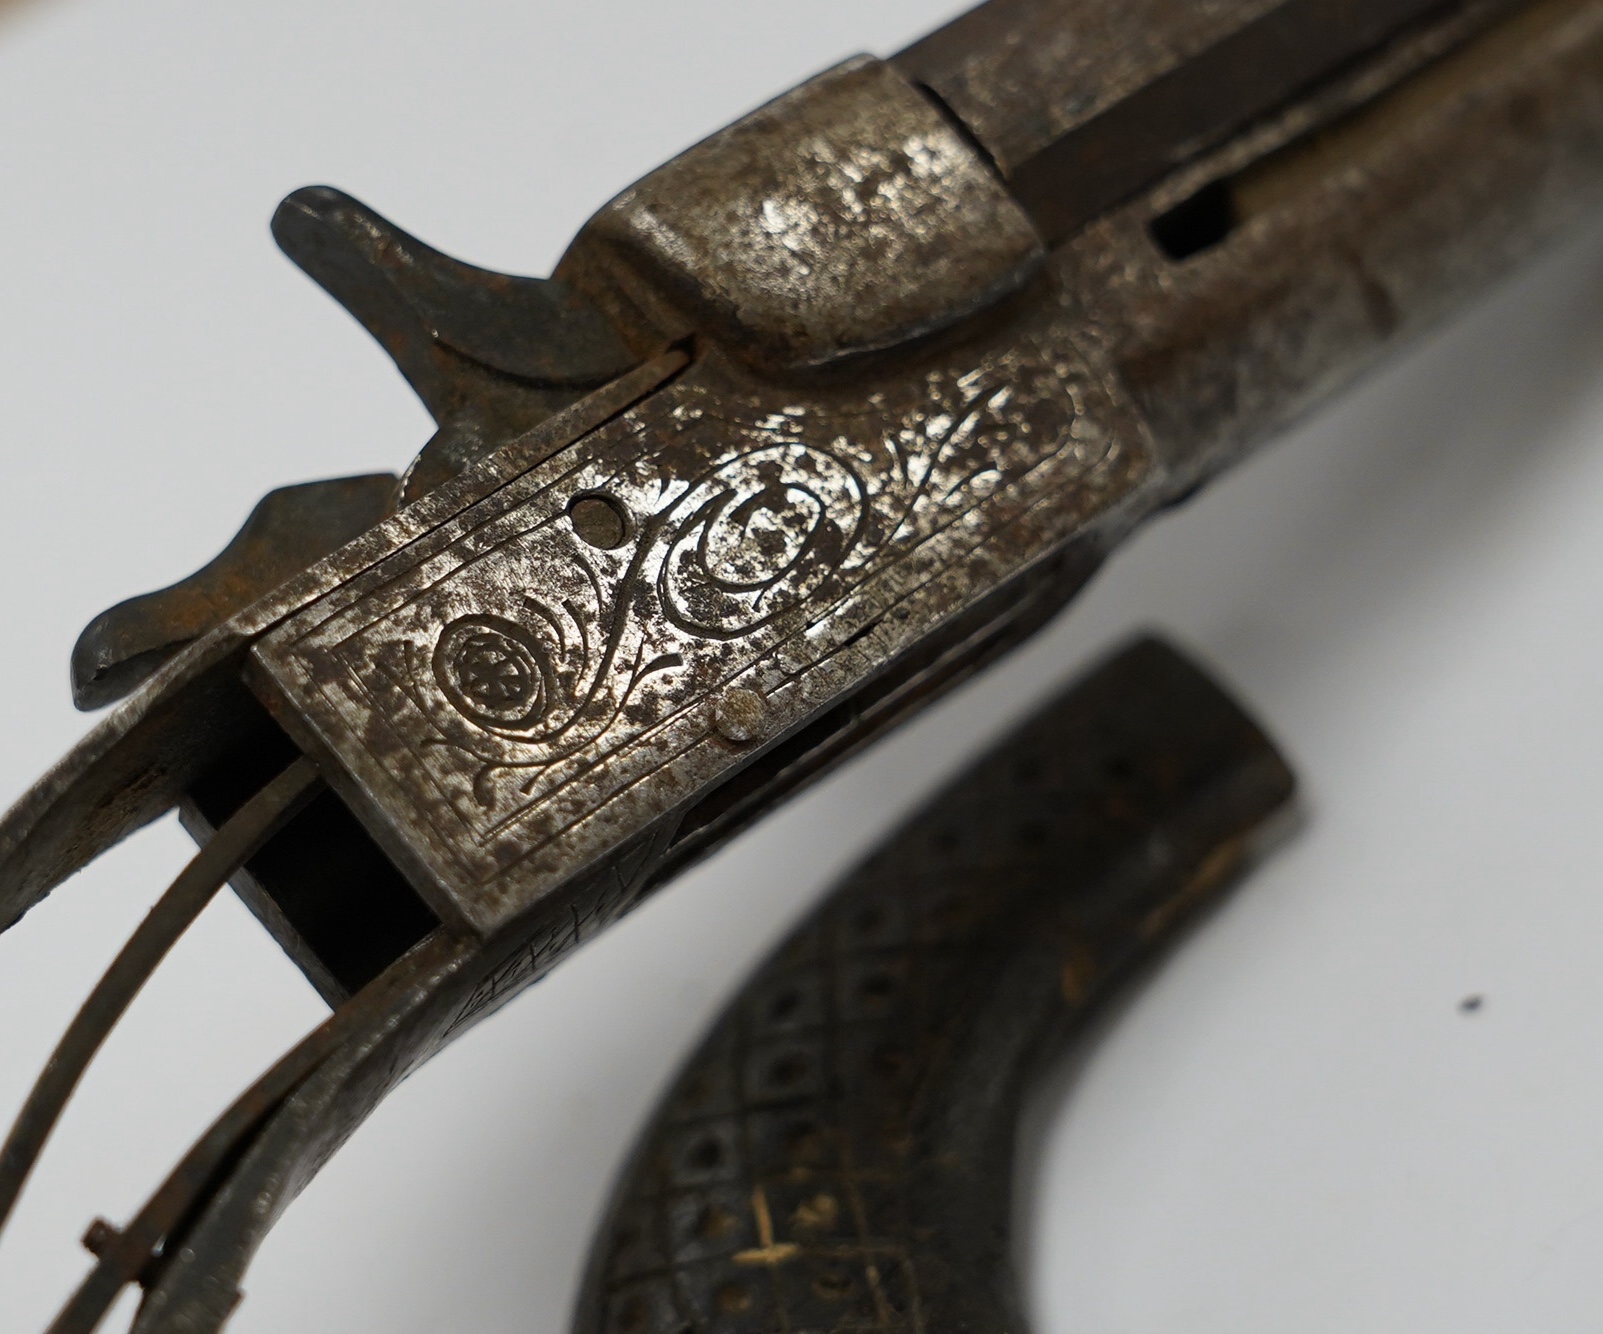 An early 19th century double-barrelled breach loading percussion pistol in relic condition, steel barrels, engraved frame, and walnut two piece grip, one piece missing, one piece detached, folding triggers, both missing